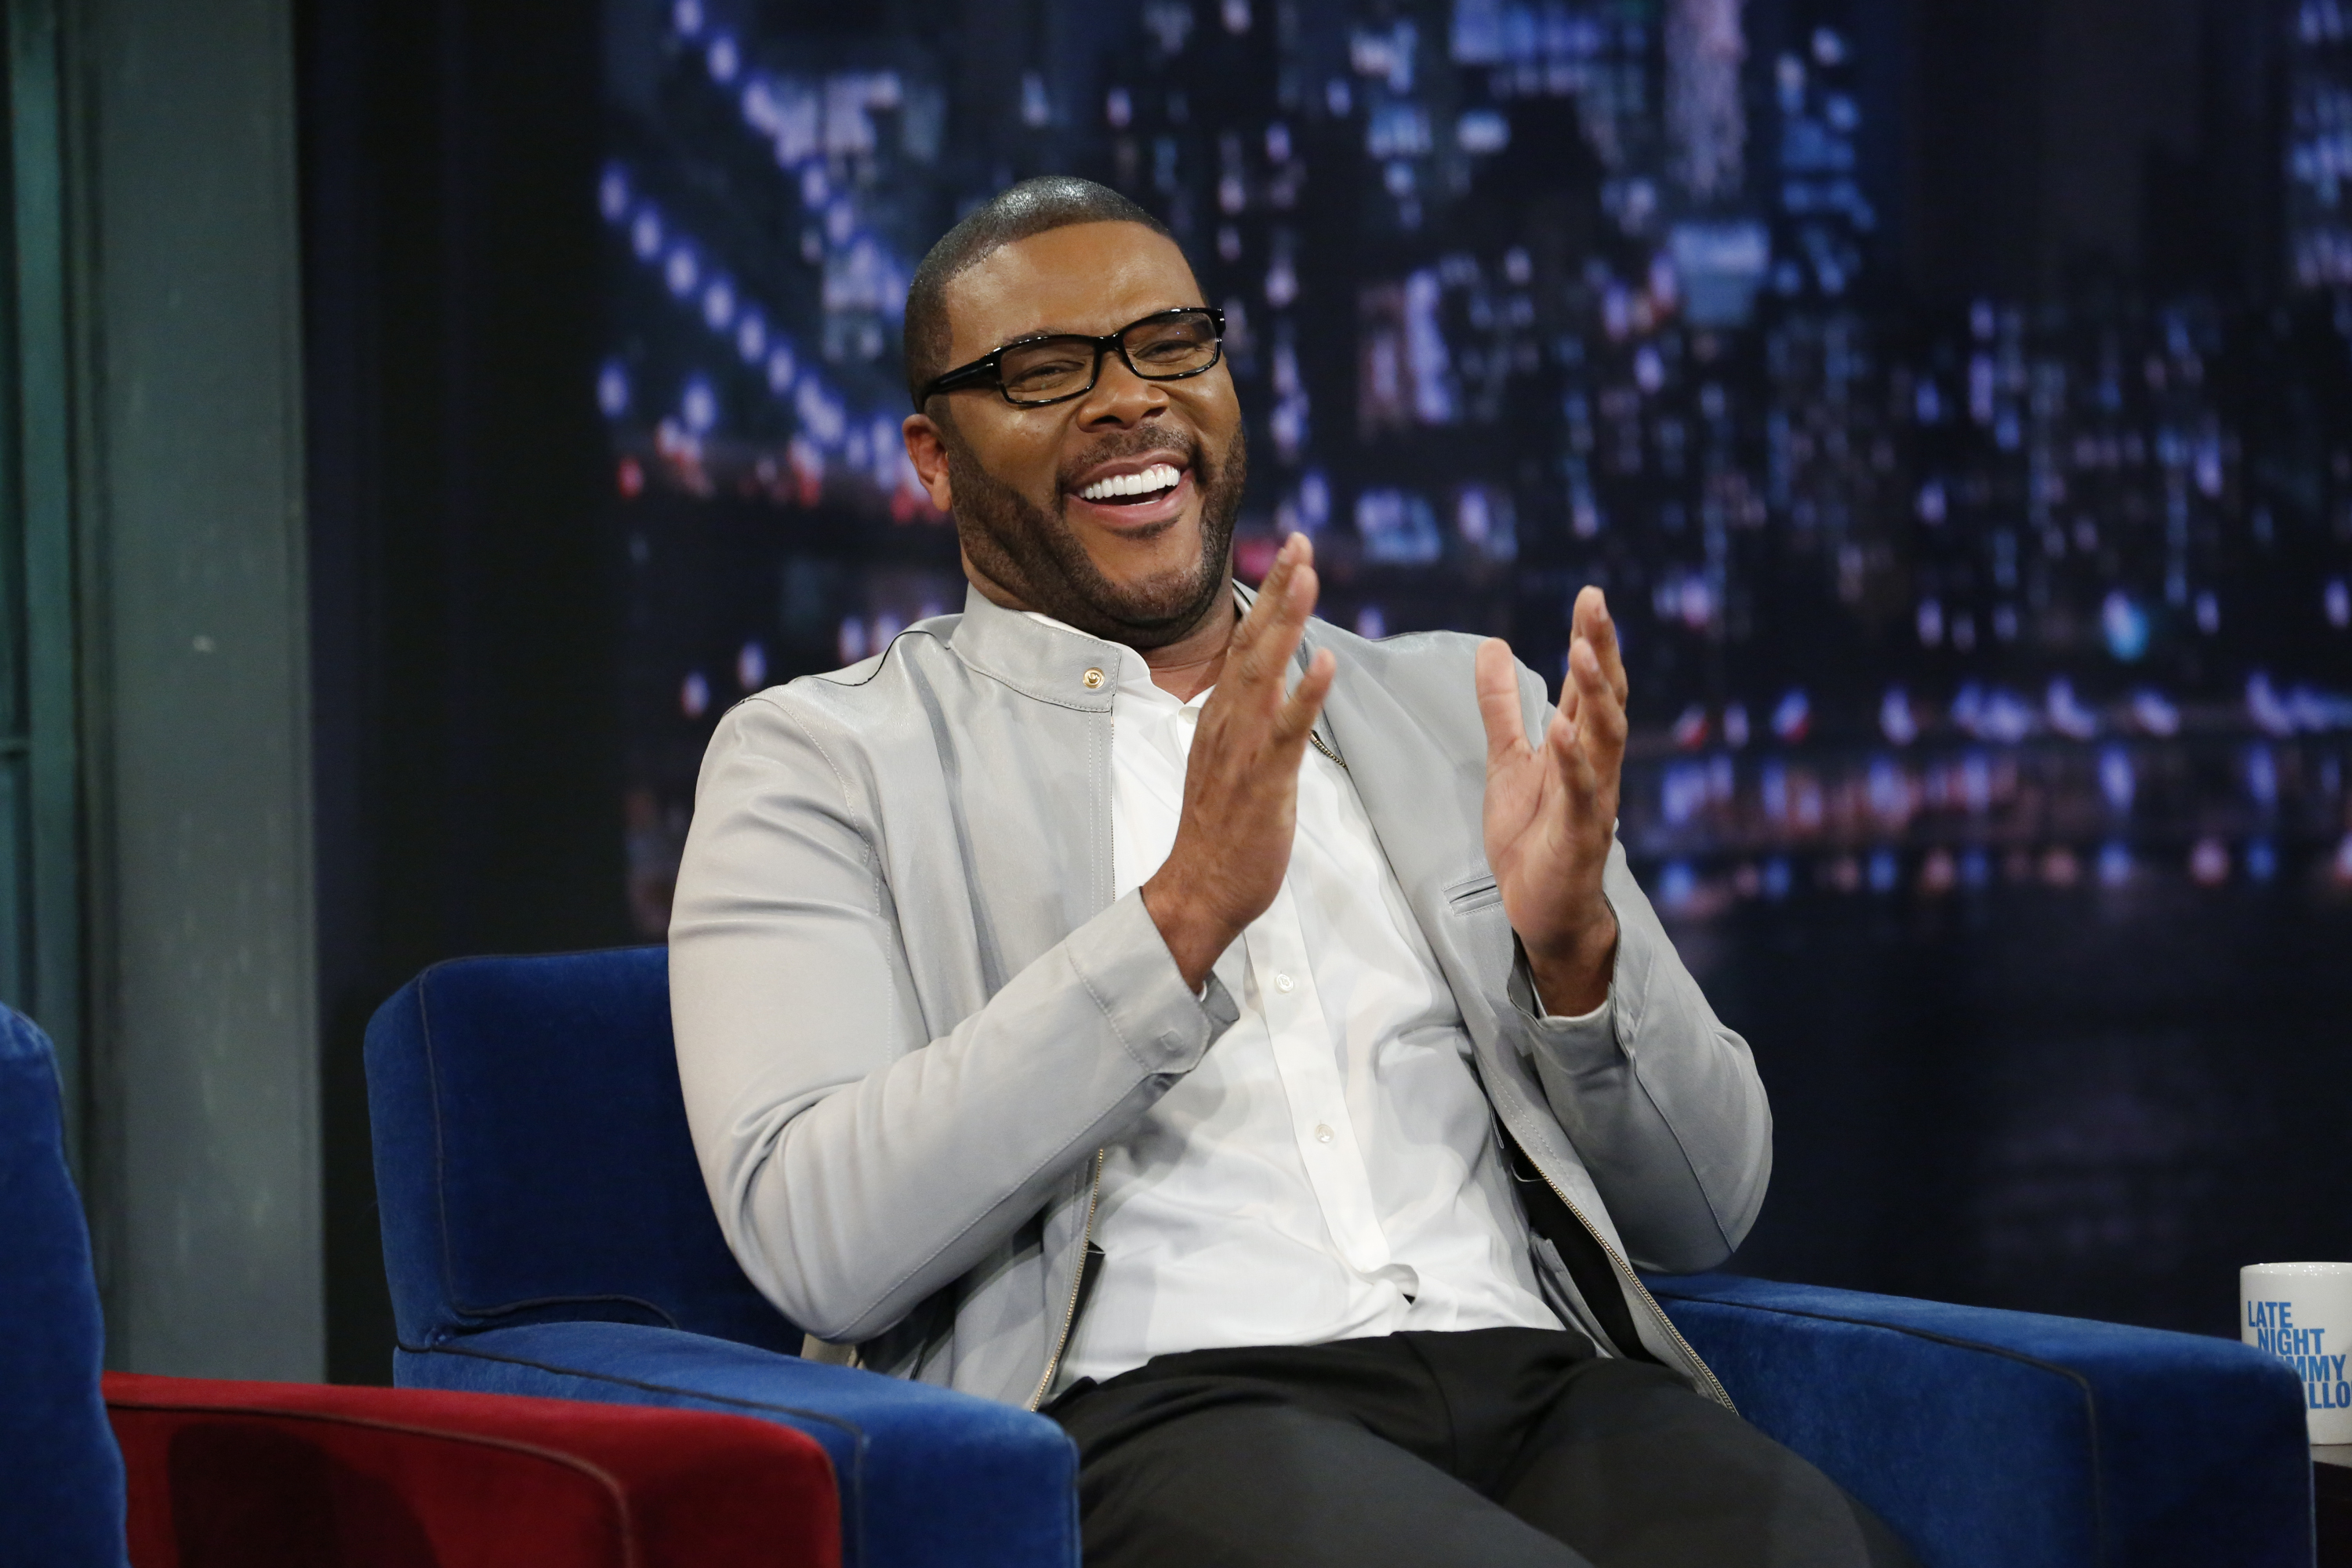 Director Tyler Perry during an appearance on Season 4 of "Late Night with Jimmy Fallon" on March 28, 2013 | Source: Getty Images